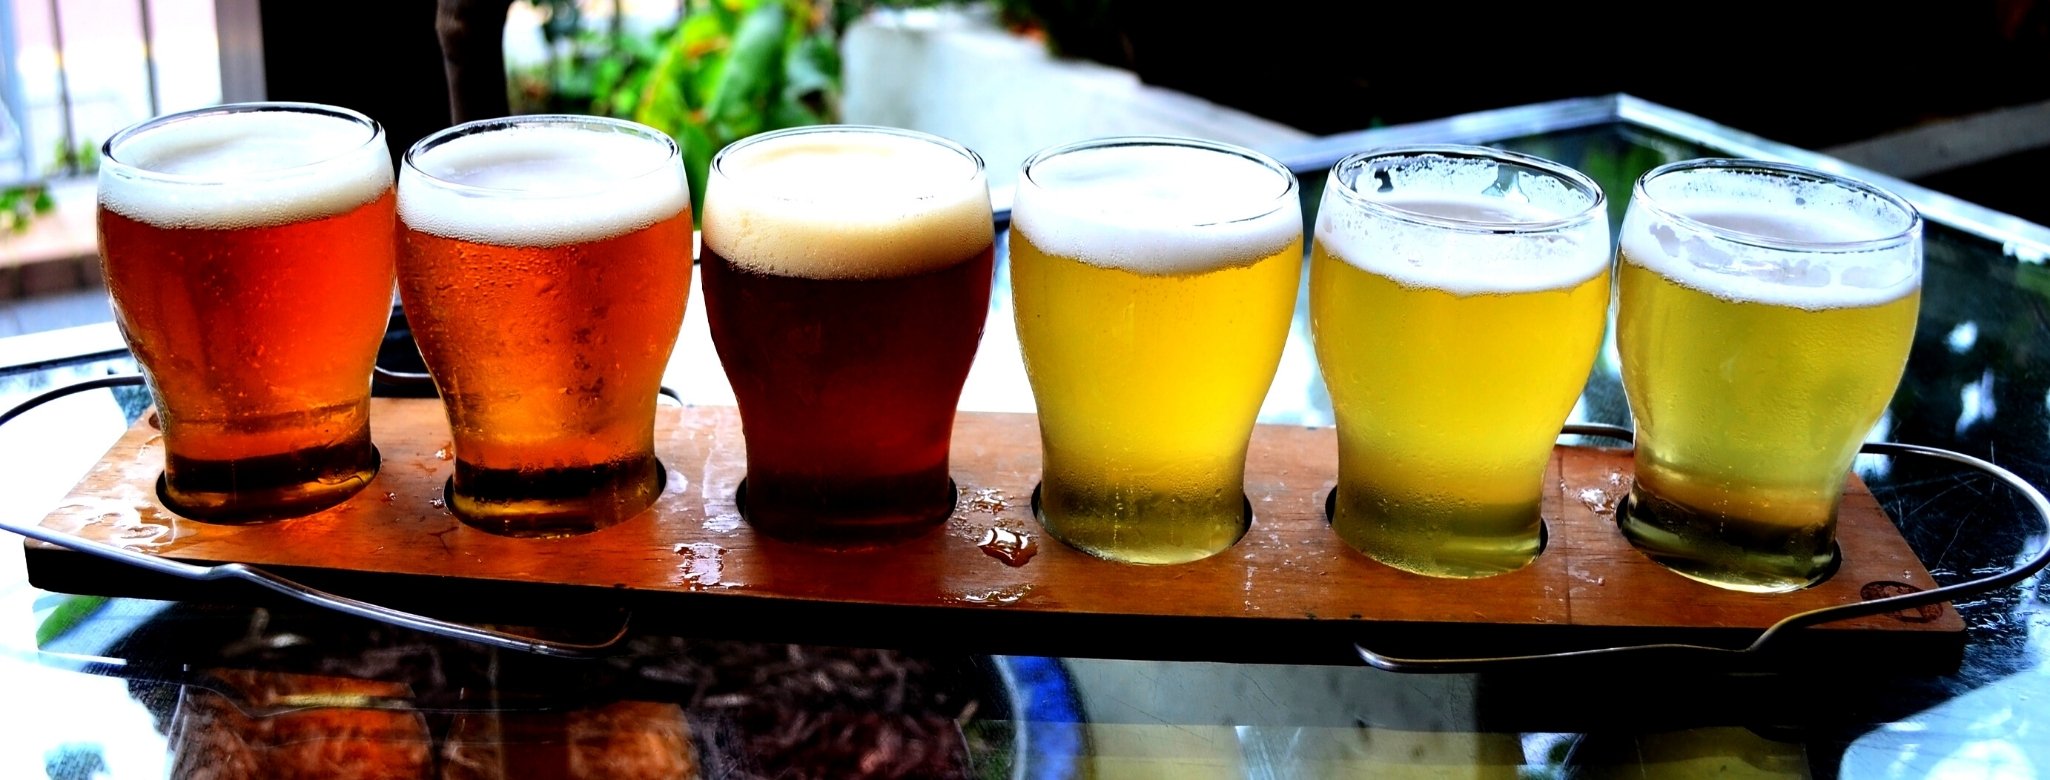 Enjoy a range of boutique beers in the Hunter Valley, New South Wales.